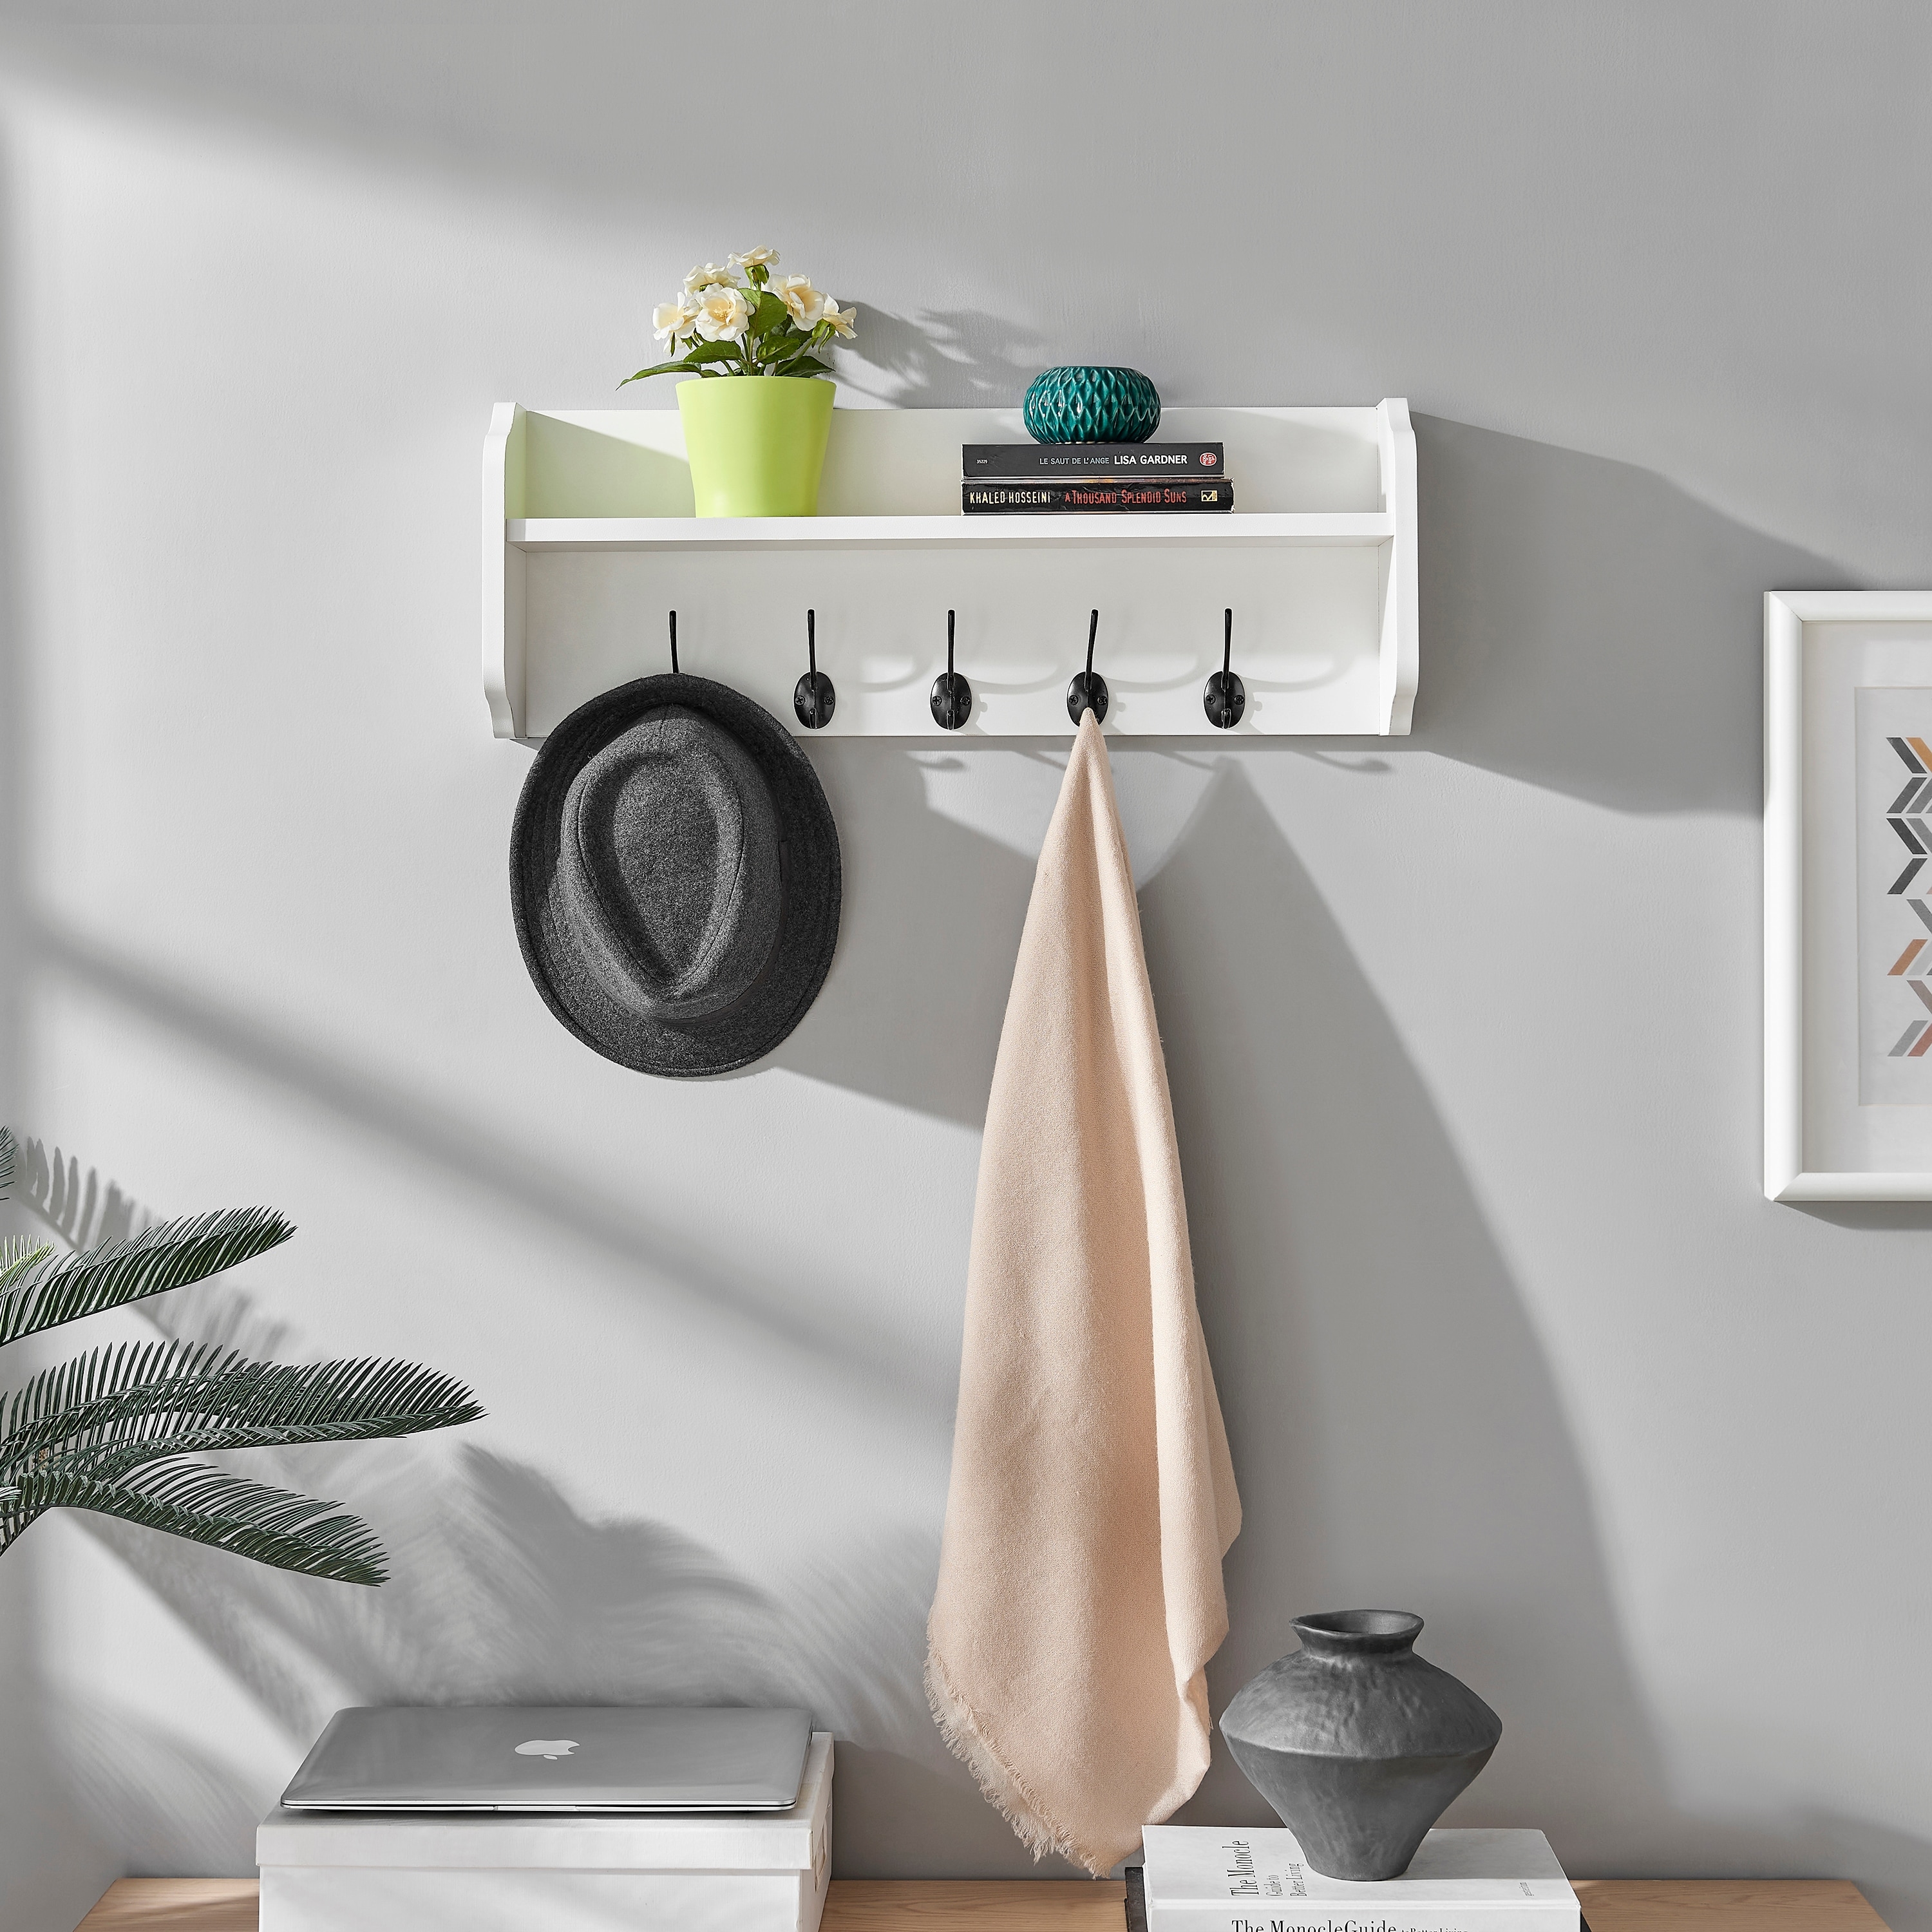 https://ak1.ostkcdn.com/images/products/is/images/direct/6eeea304cceed79a02d95364c8b1cfb134faa10c/Danya-B.-Entryway-Floating-Utility-Wall-Shelf-with-Hooks---Wall-Mounted.jpg